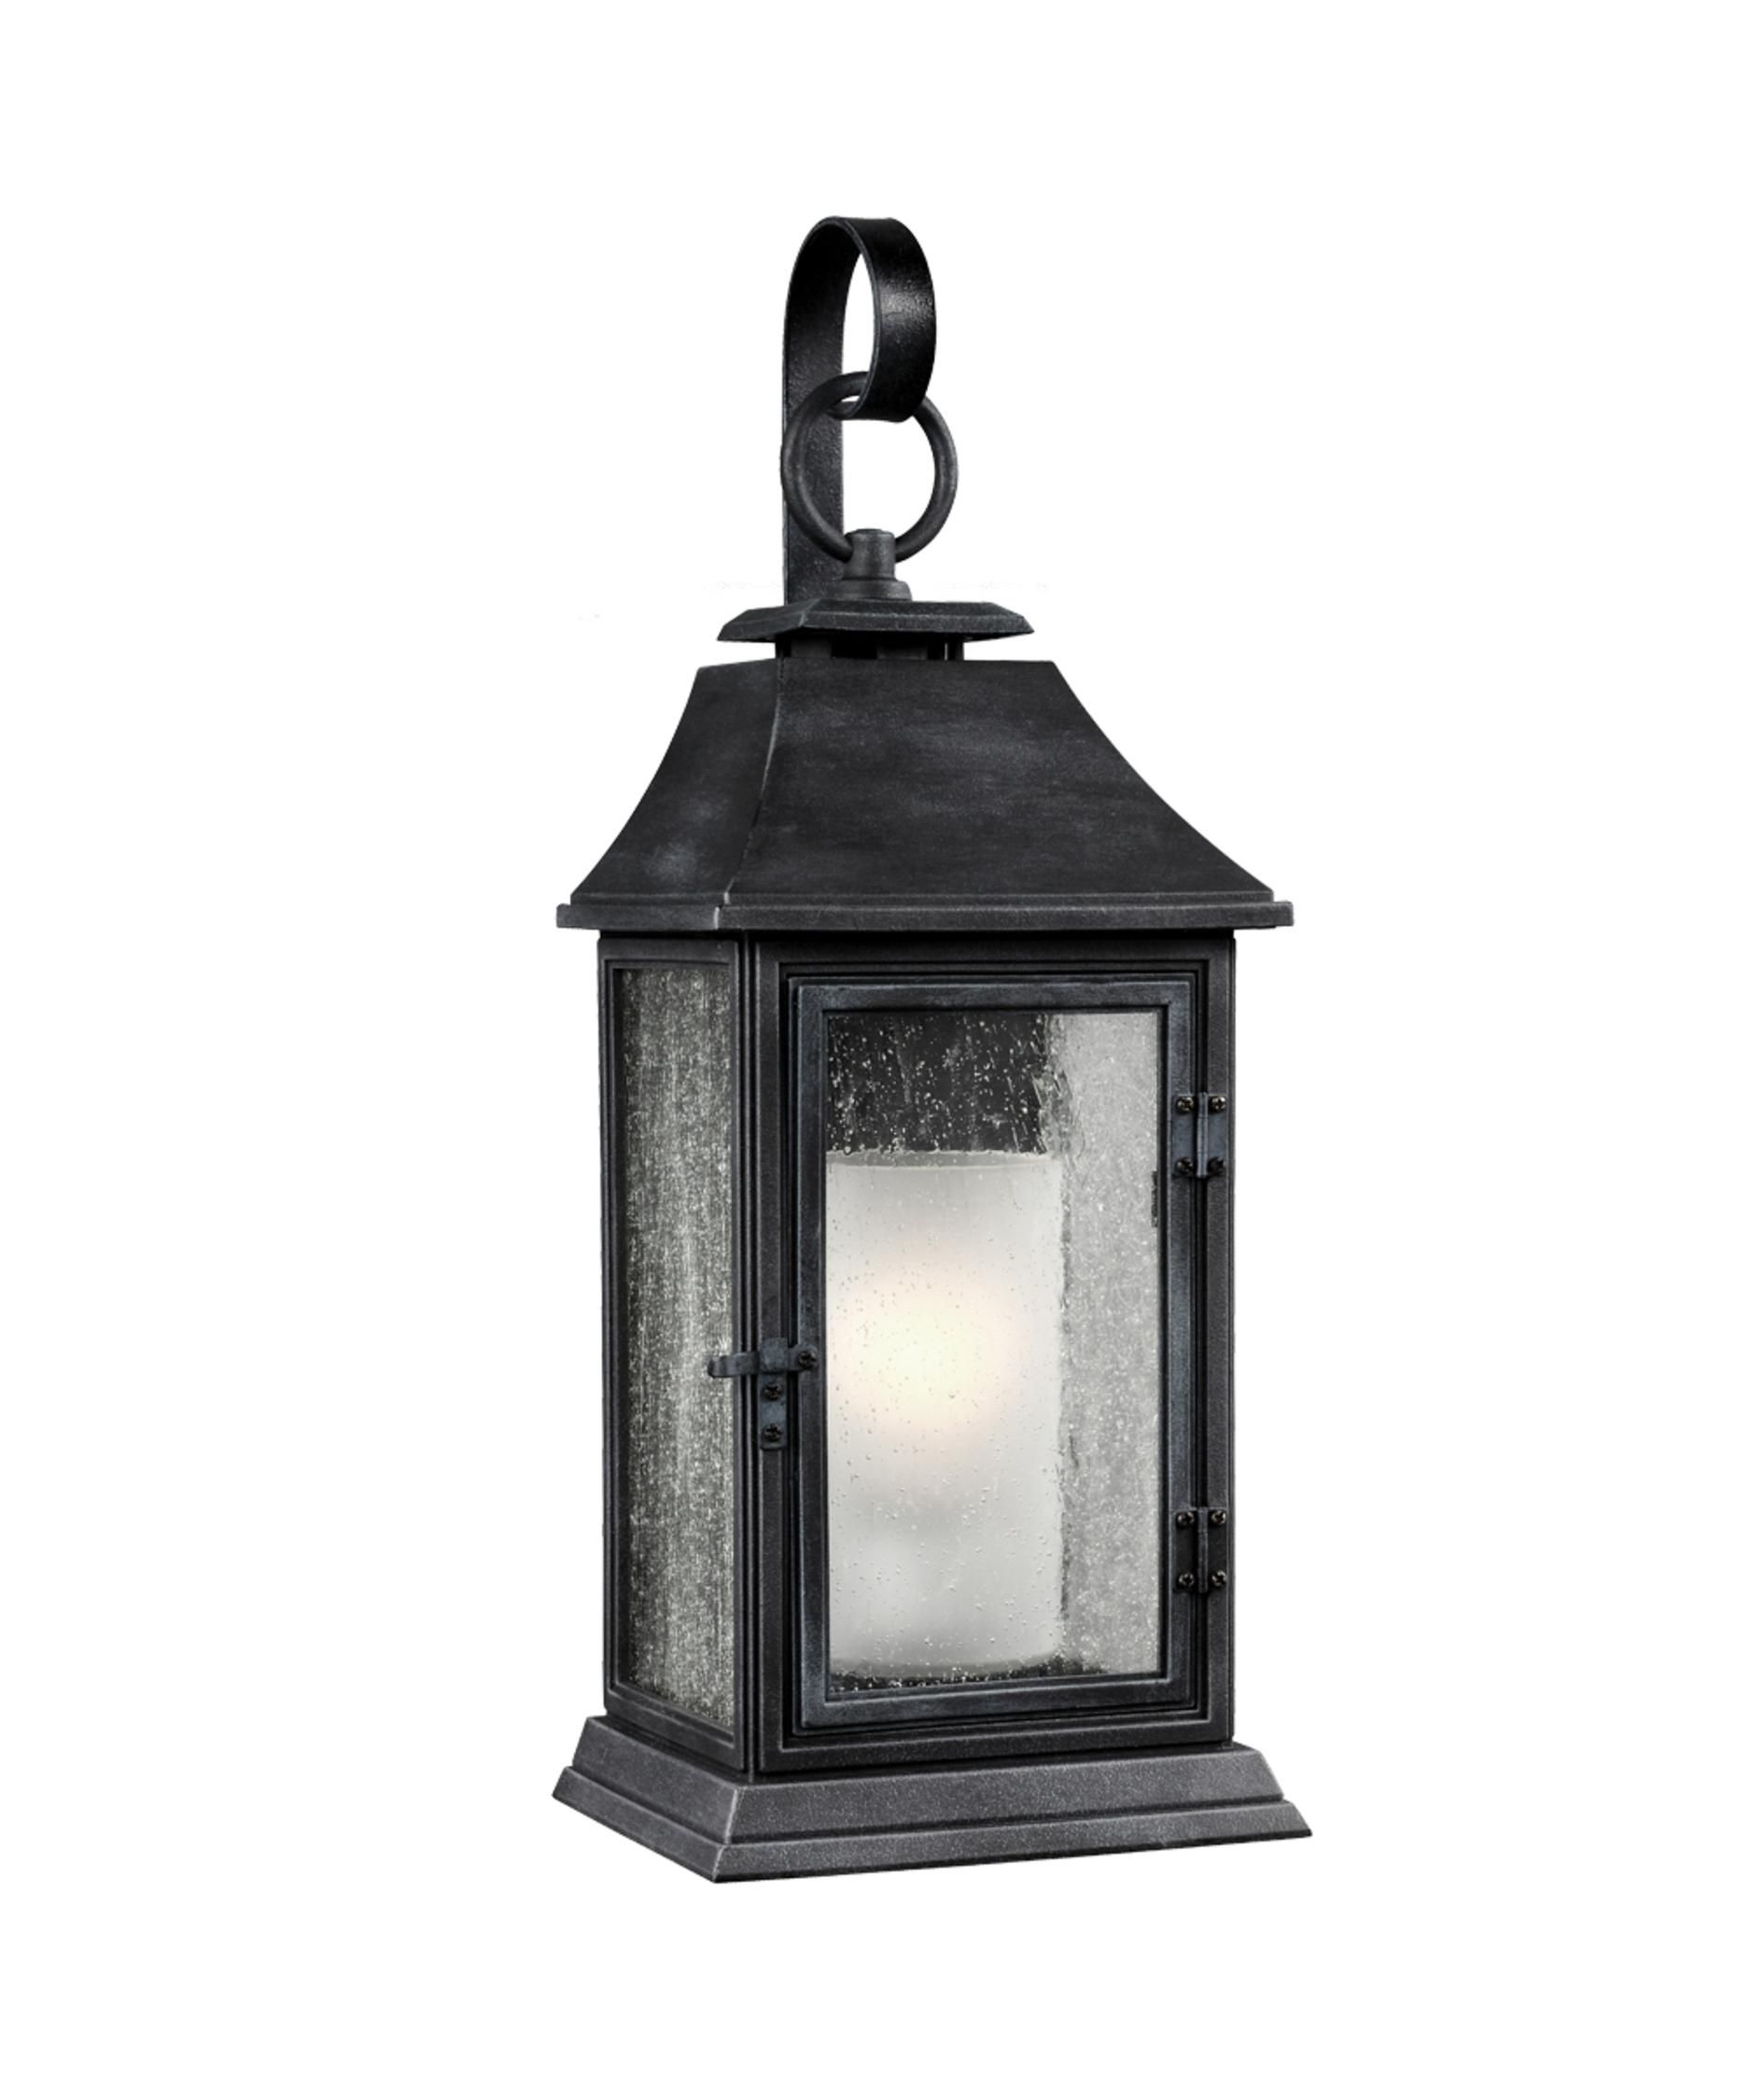 Murray Feiss Ol10602 Shepherd 9 Inch Wide 1 Light Outdoor Wall Light Regarding Outdoor Wall Lighting With Seeded Glass (View 3 of 15)